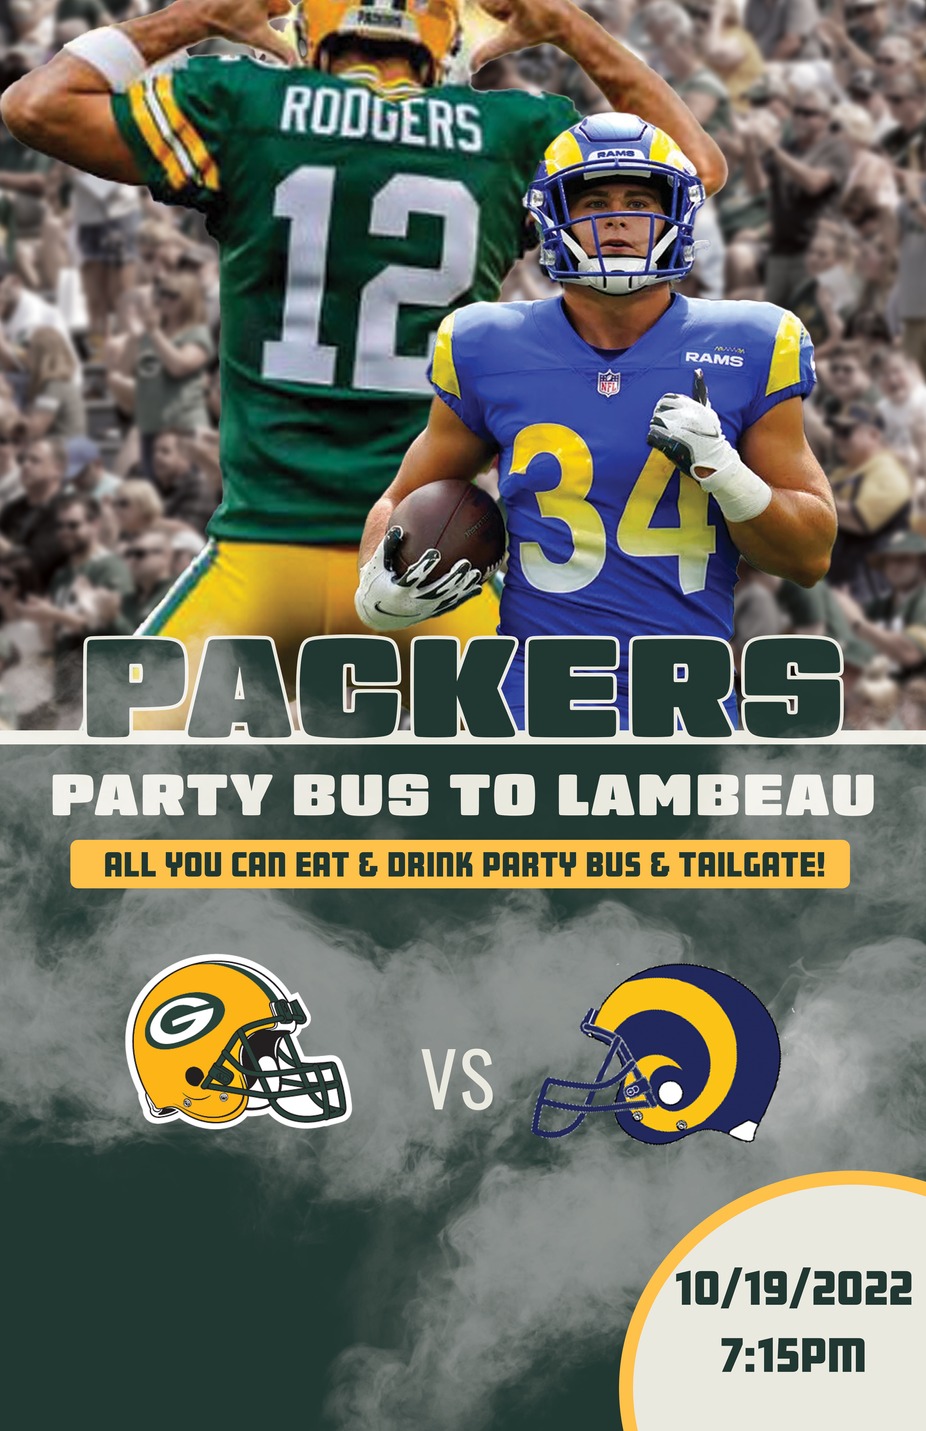 Packers Vs. Rams Party Bus to Lambeau event photo